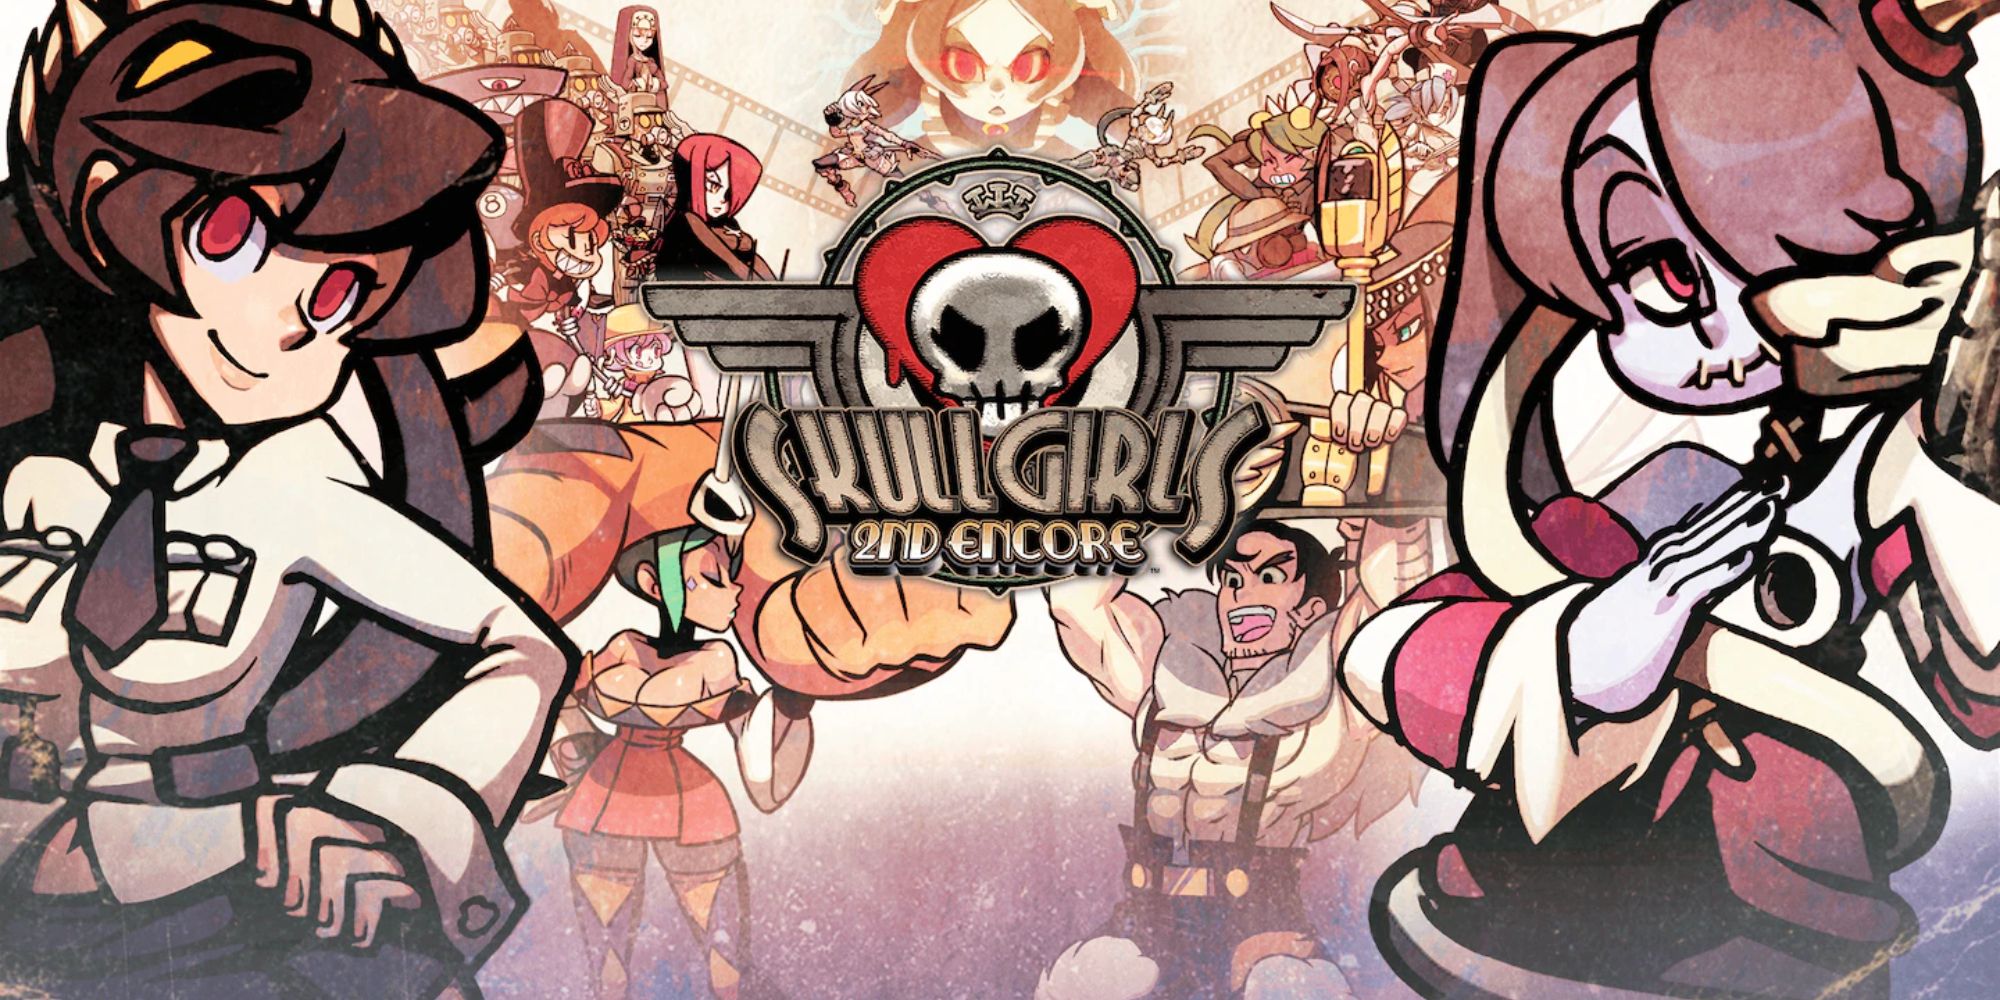 a promotional image for Skullgirls 2nd Encore featuring the game's logo and various characters scattered throughout with Filia prominently on the left and Squigly on the right